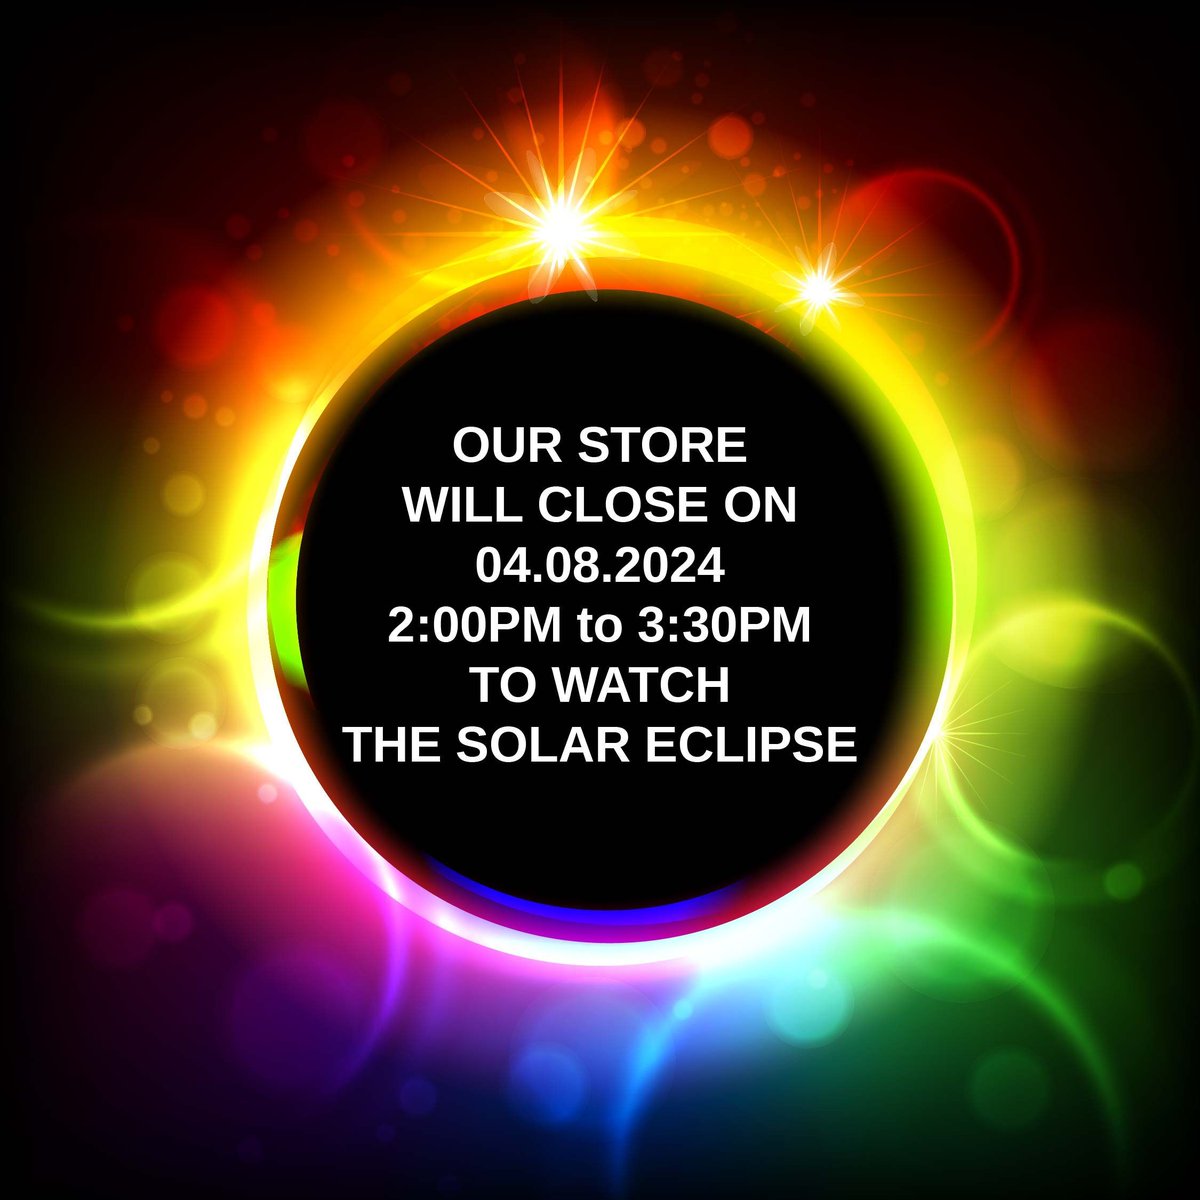 🌔 STORE UPDATE - Our store will close on today, Monday, April 8th, 2024 between 2:00pm and 3:30pm so that our staff may enjoy the solar eclipse event 🌞